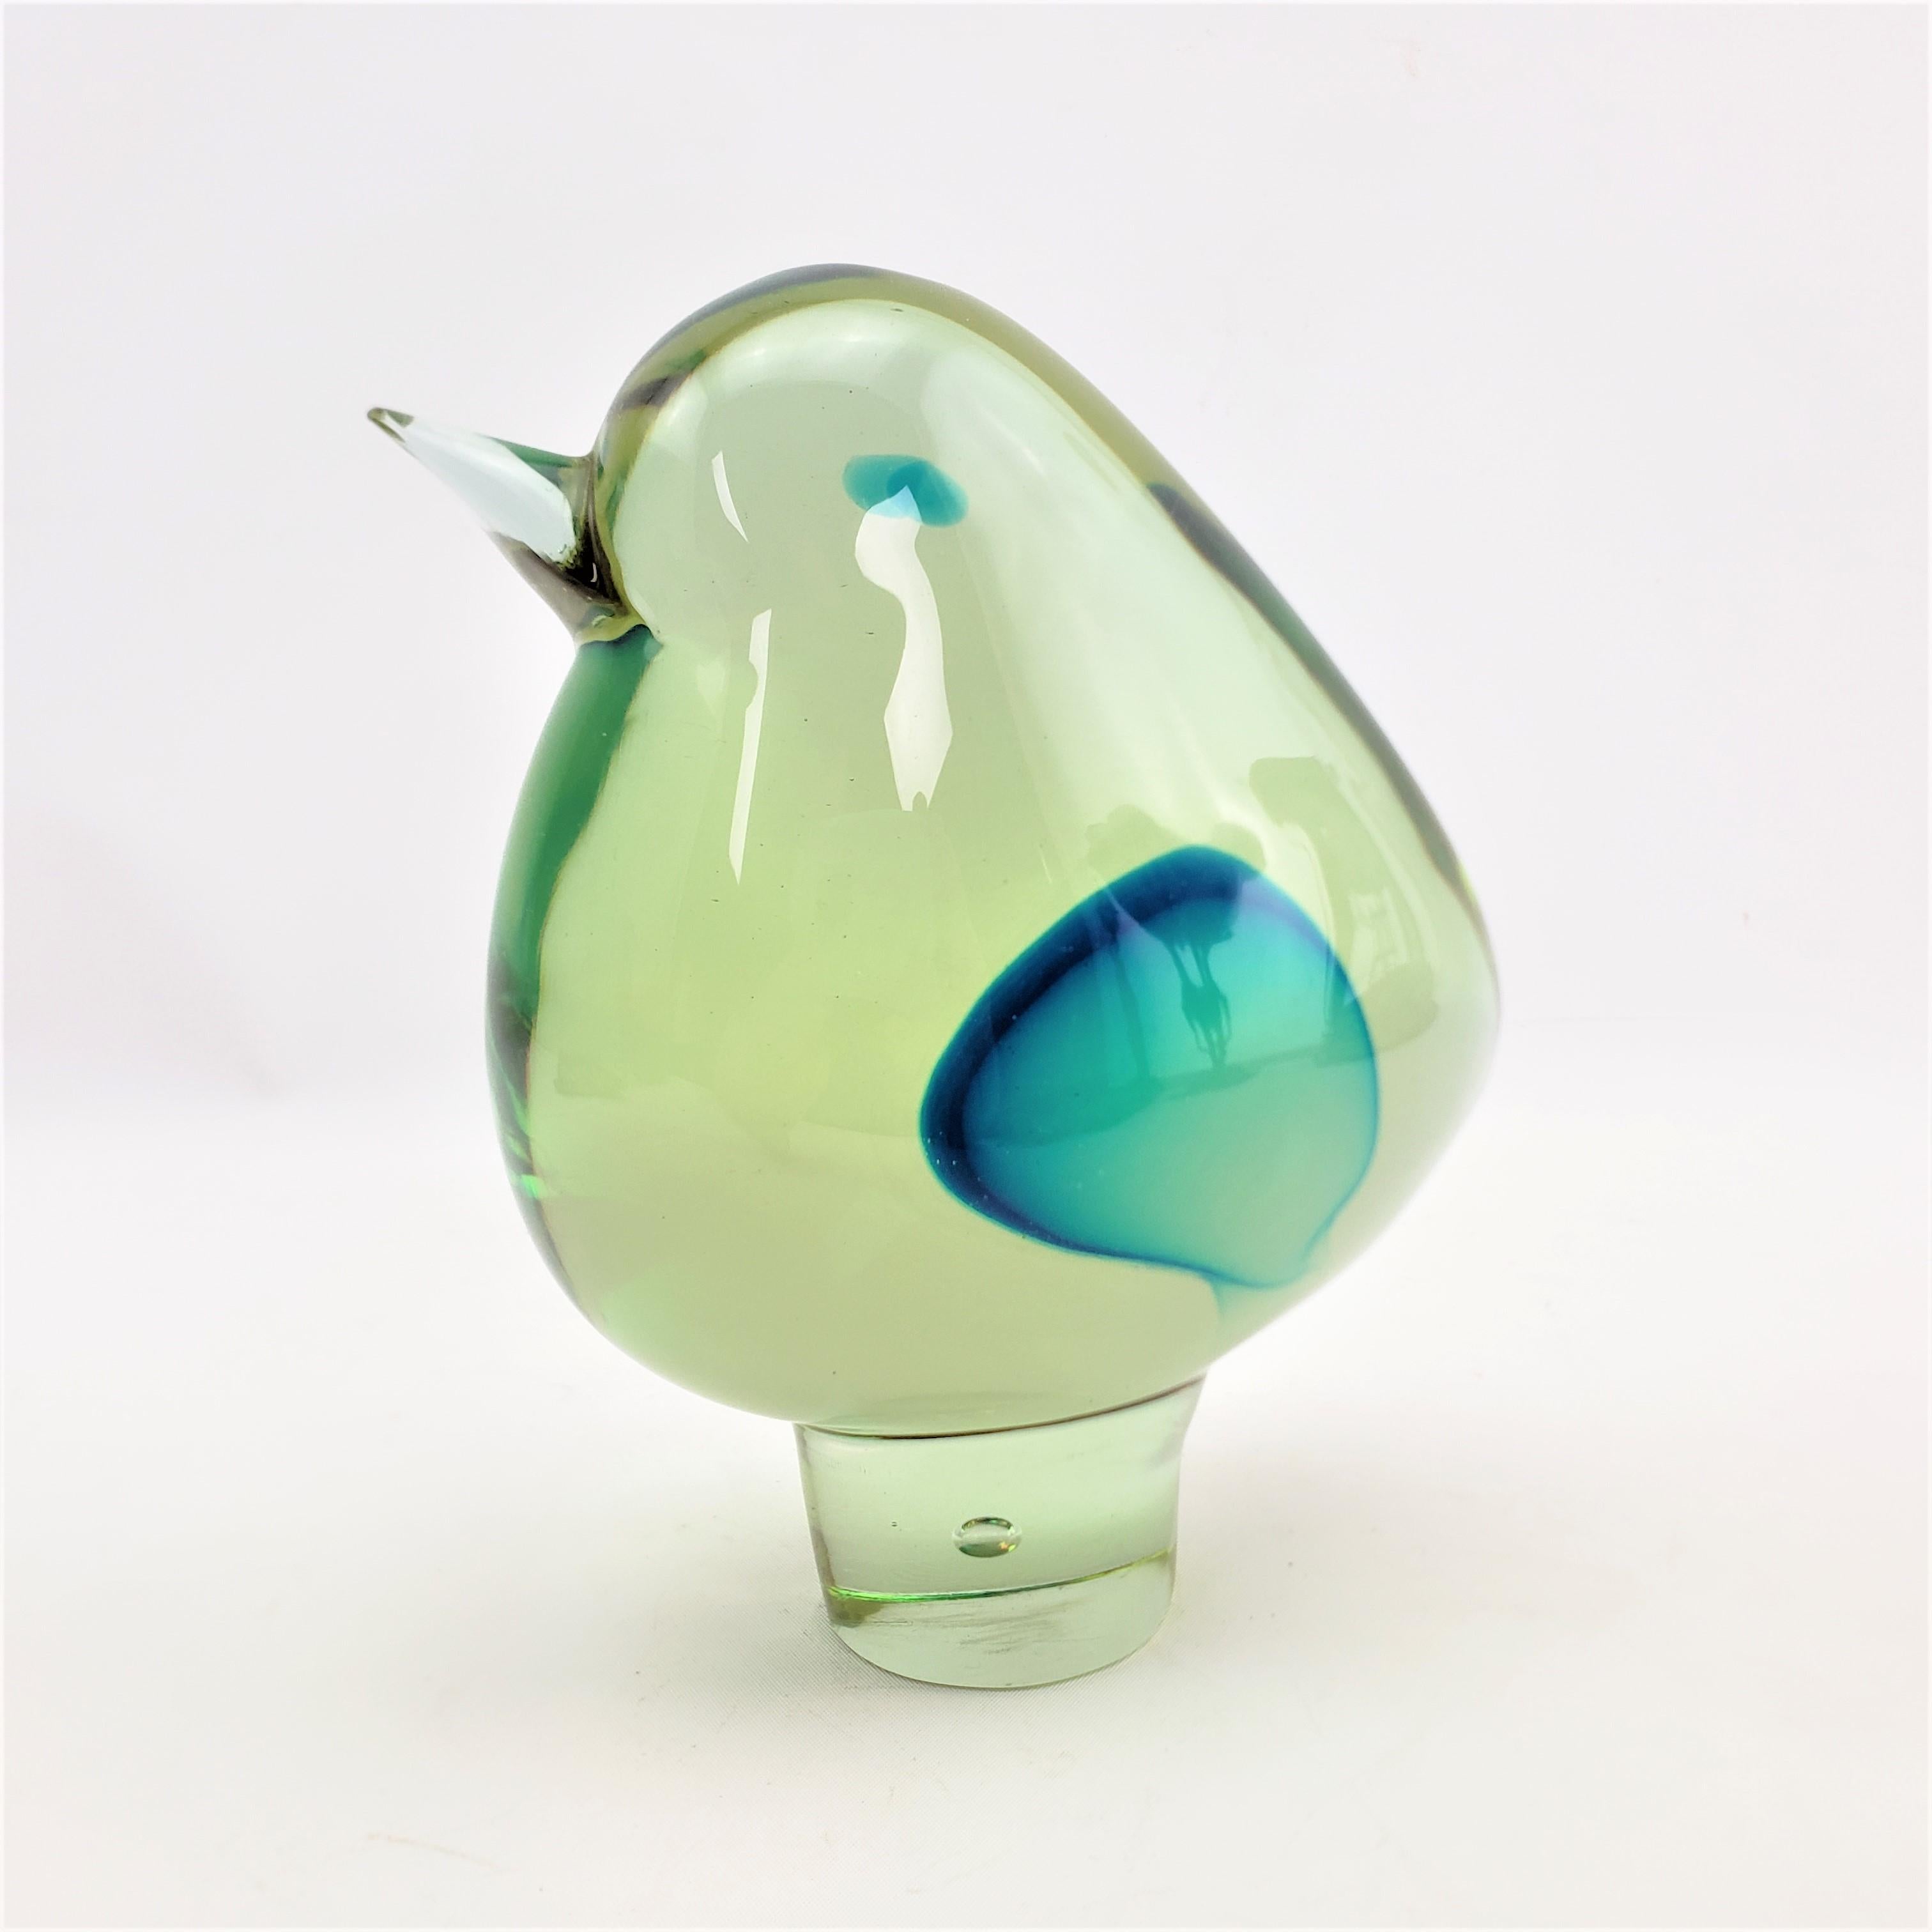 This stylized art glass bird sculpture or figurine is unsigned, but being attributed to Cenedese Murano, and as such, originating from Italy and dating to approximately 1960 and done in the period Mid-Century Modern style. The sculpture is done with